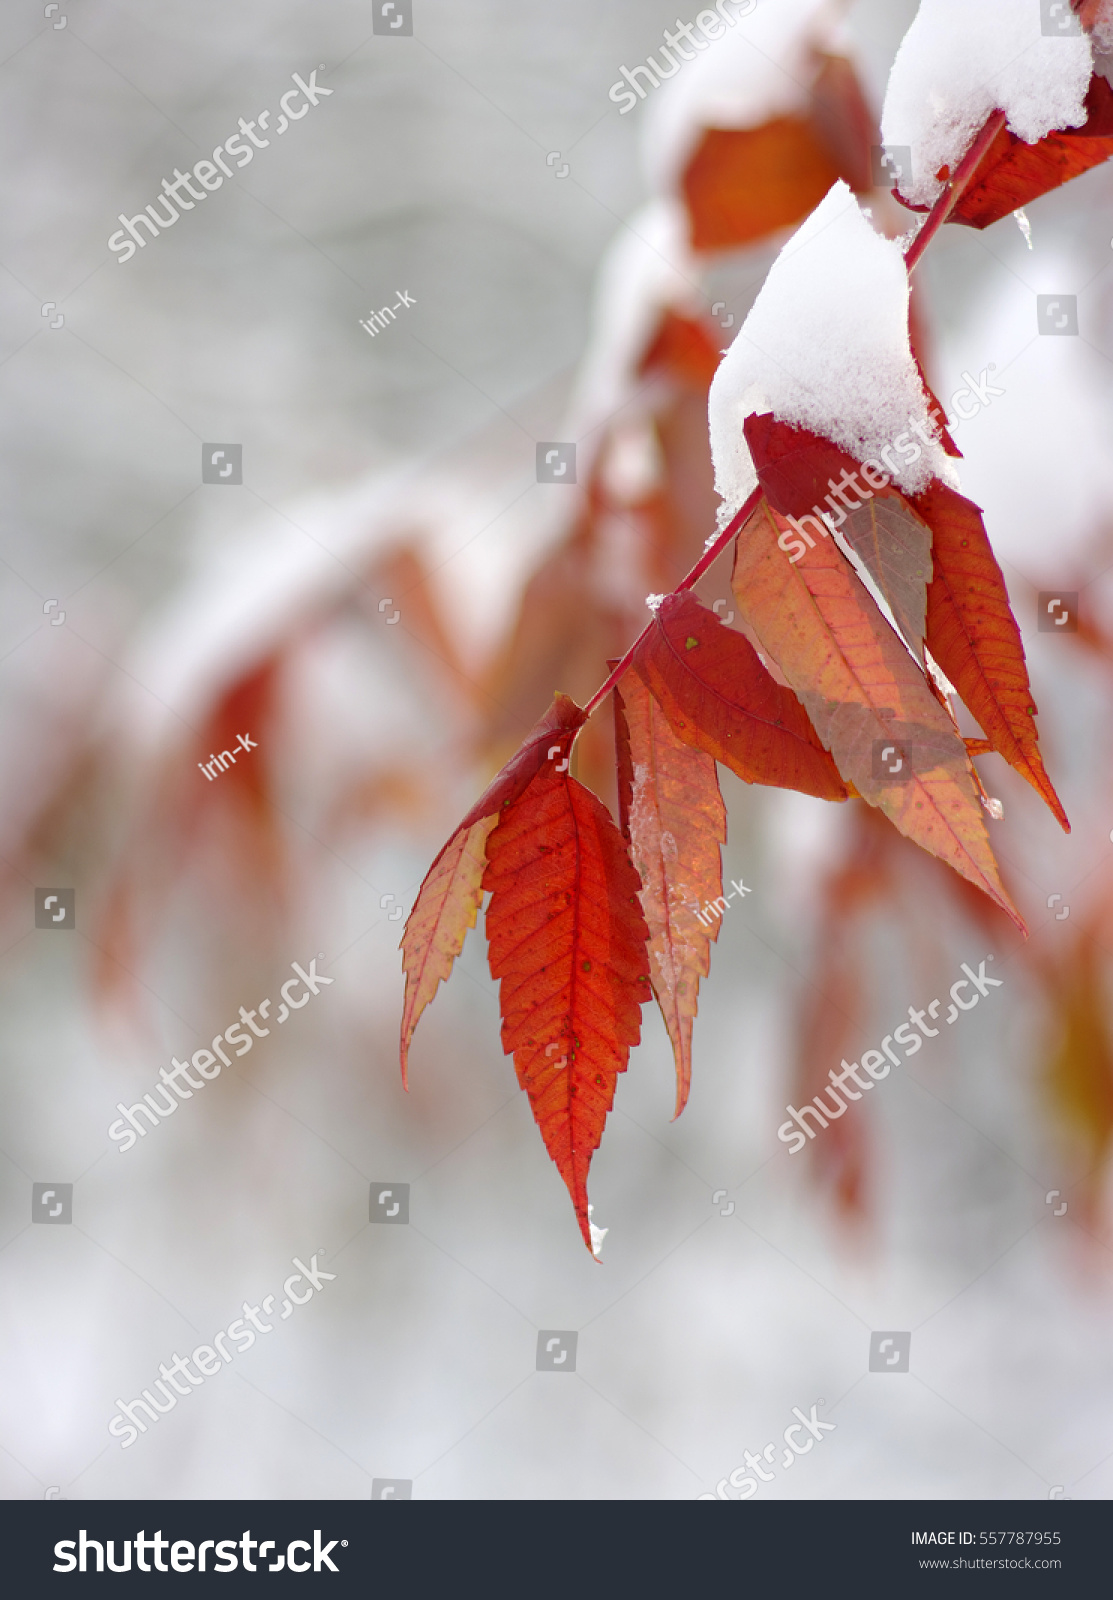 Yellow leaves in snow. Late fall and early winter. Blurred nature background with shallow dof. #557787955